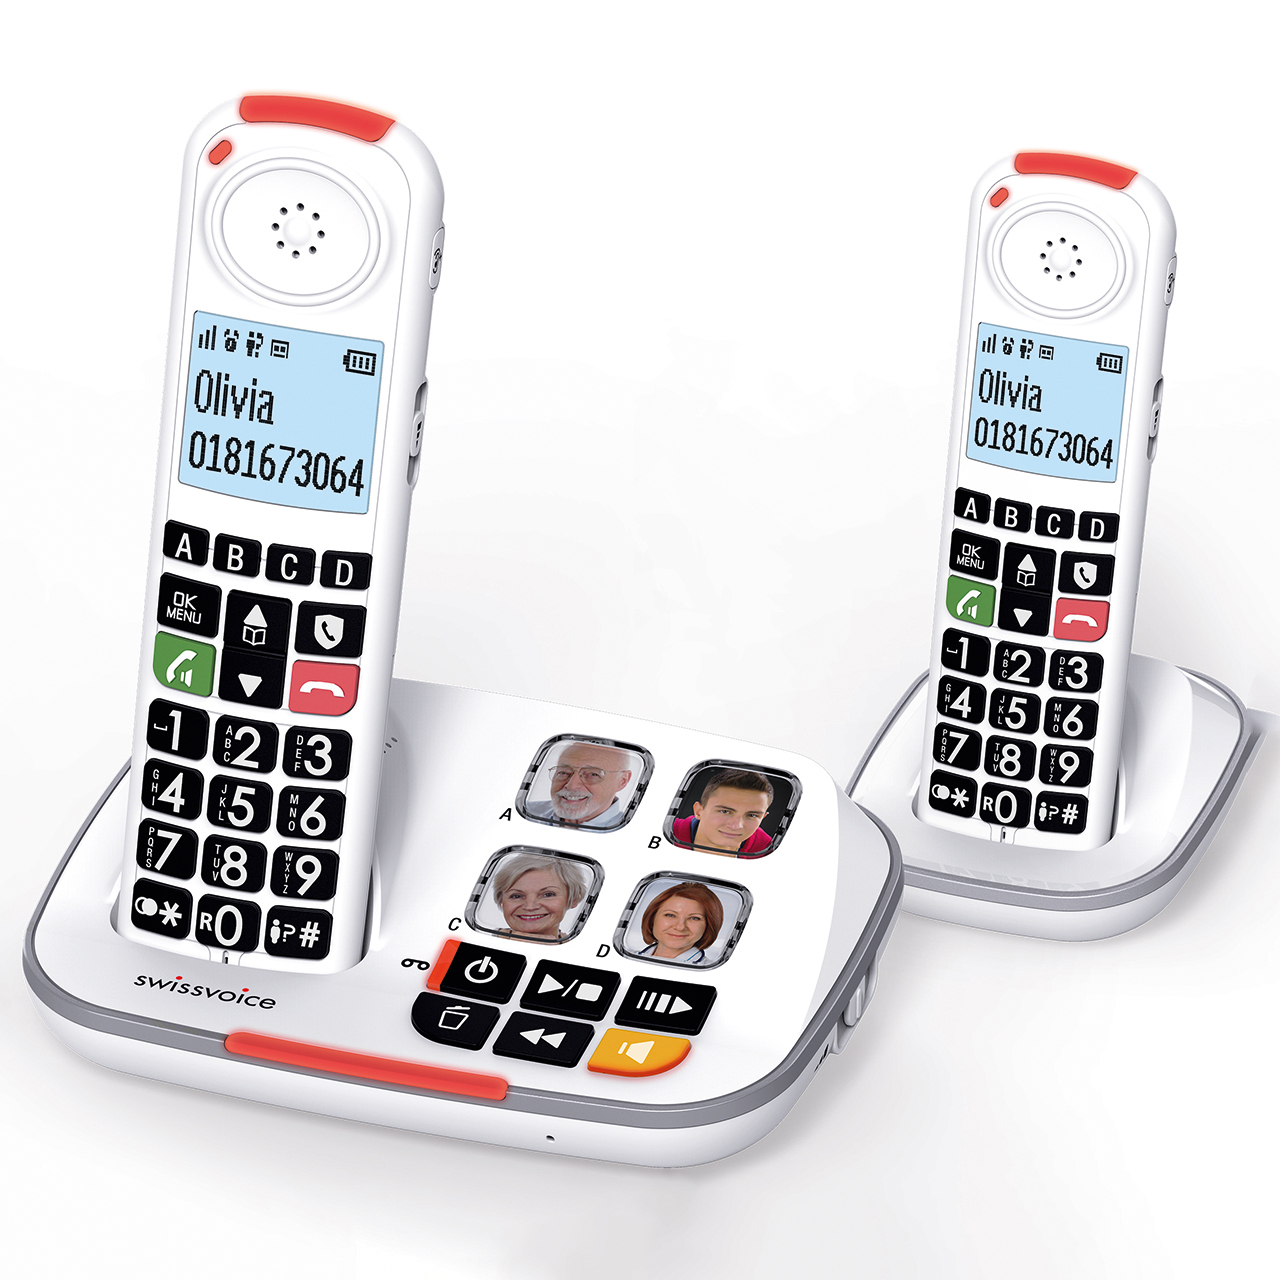 Swissvoice DECT Cordless Phone with Extra Handset